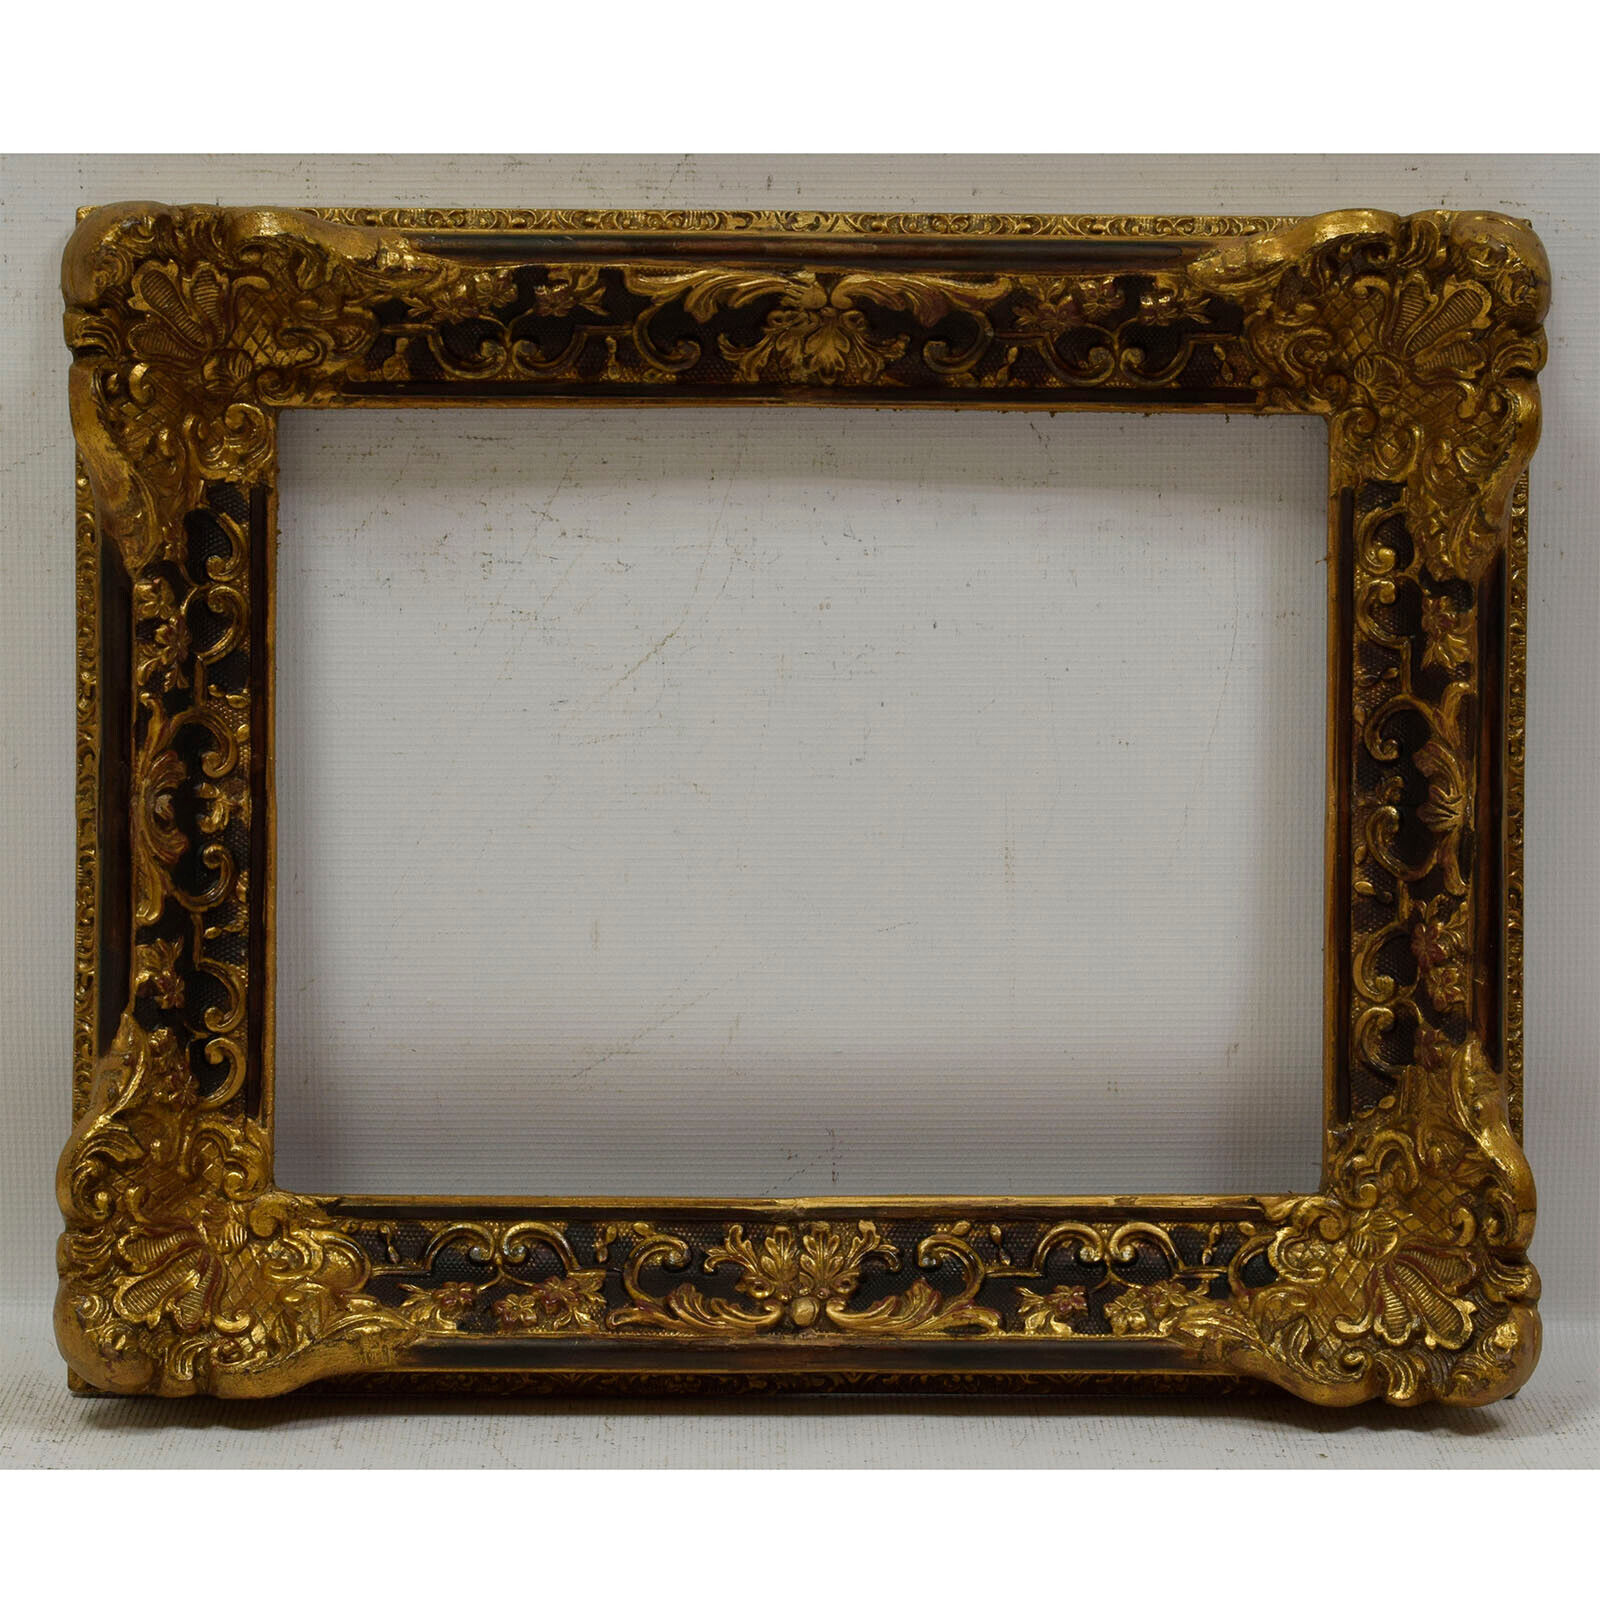 Ca1900-1920 Old wooden frame decorative original condition Internal: 15.9x12 in